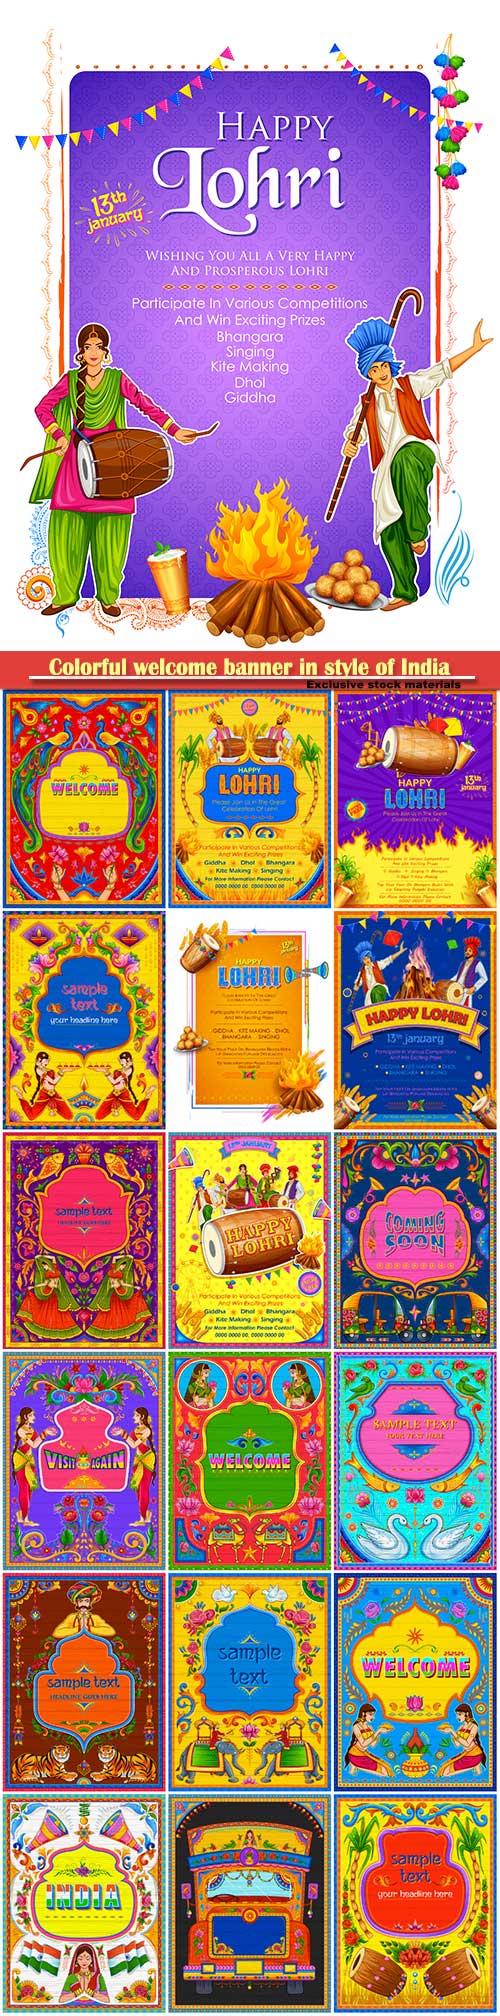 Vector illustration of colorful welcome banner in style of India